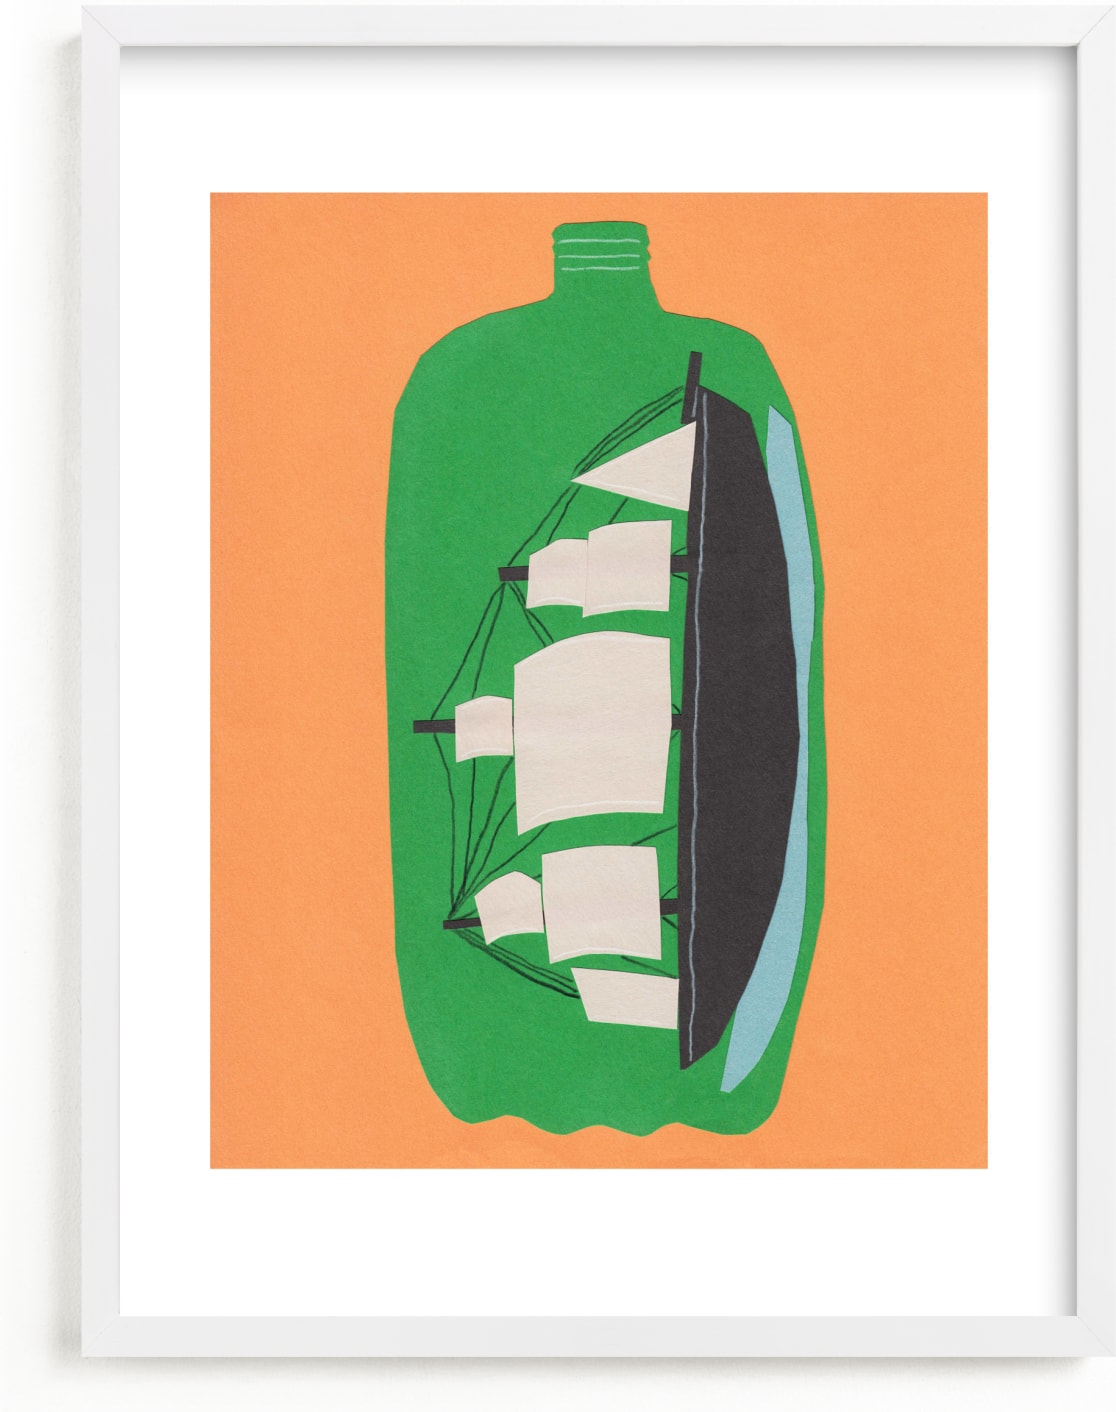 This is a colorful kids wall art by Elliot Stokes called Two Liter Ship.